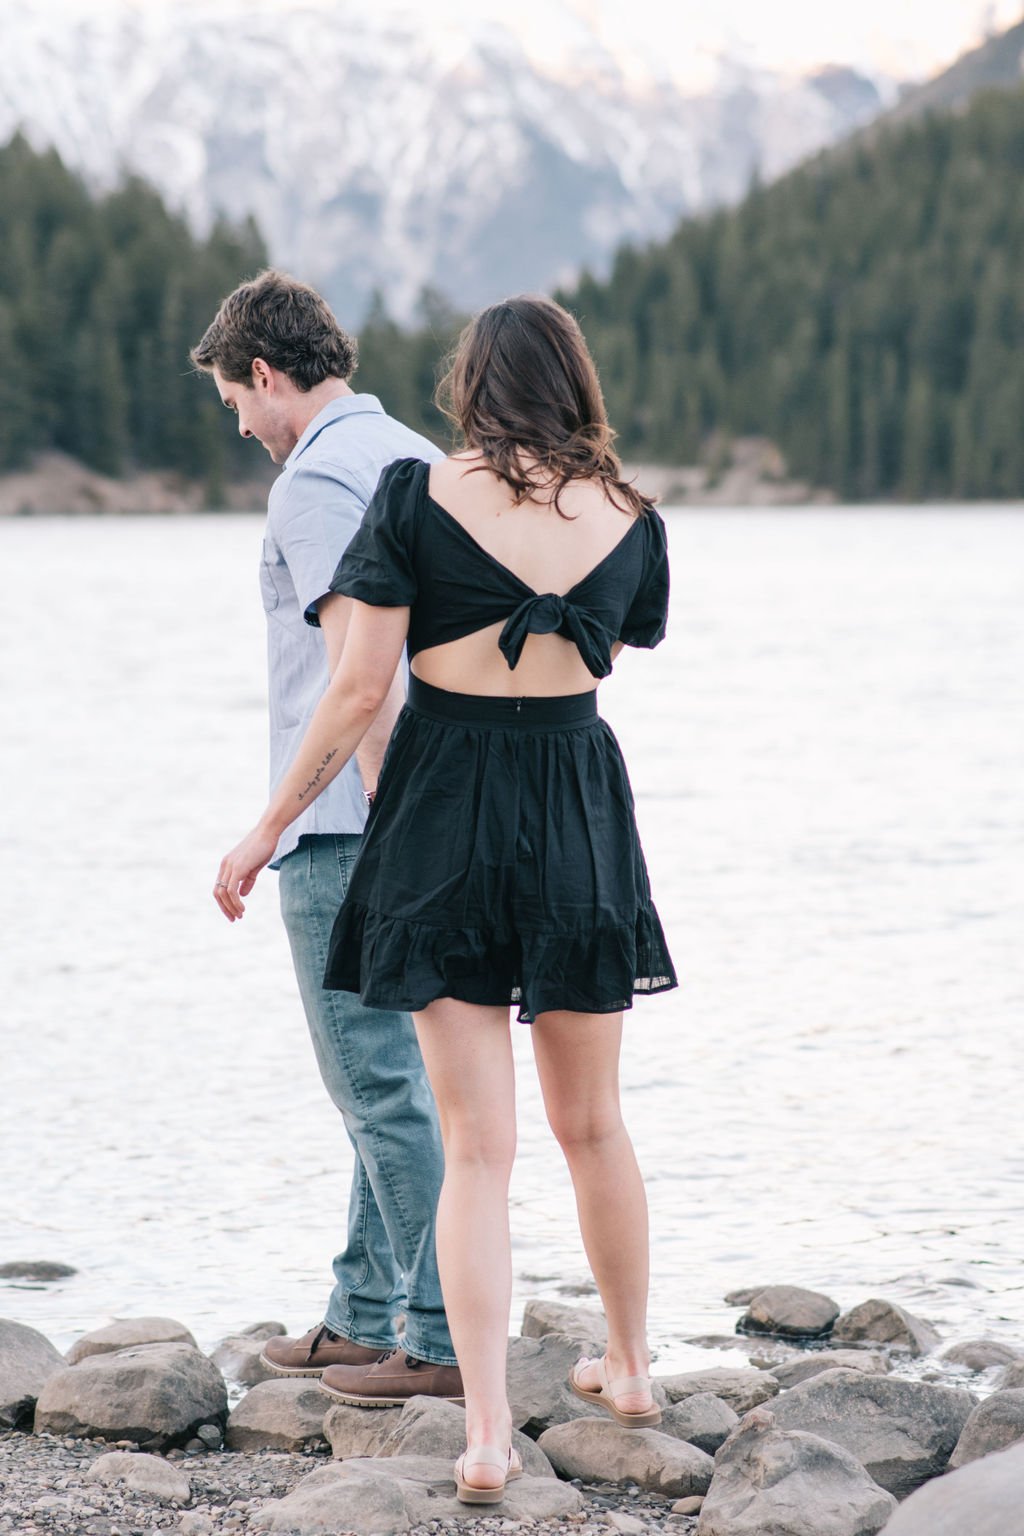 Unforgettably romantic destination engagement session in Banff National Park photographed by Toronto wedding photographers, Ugo Photography